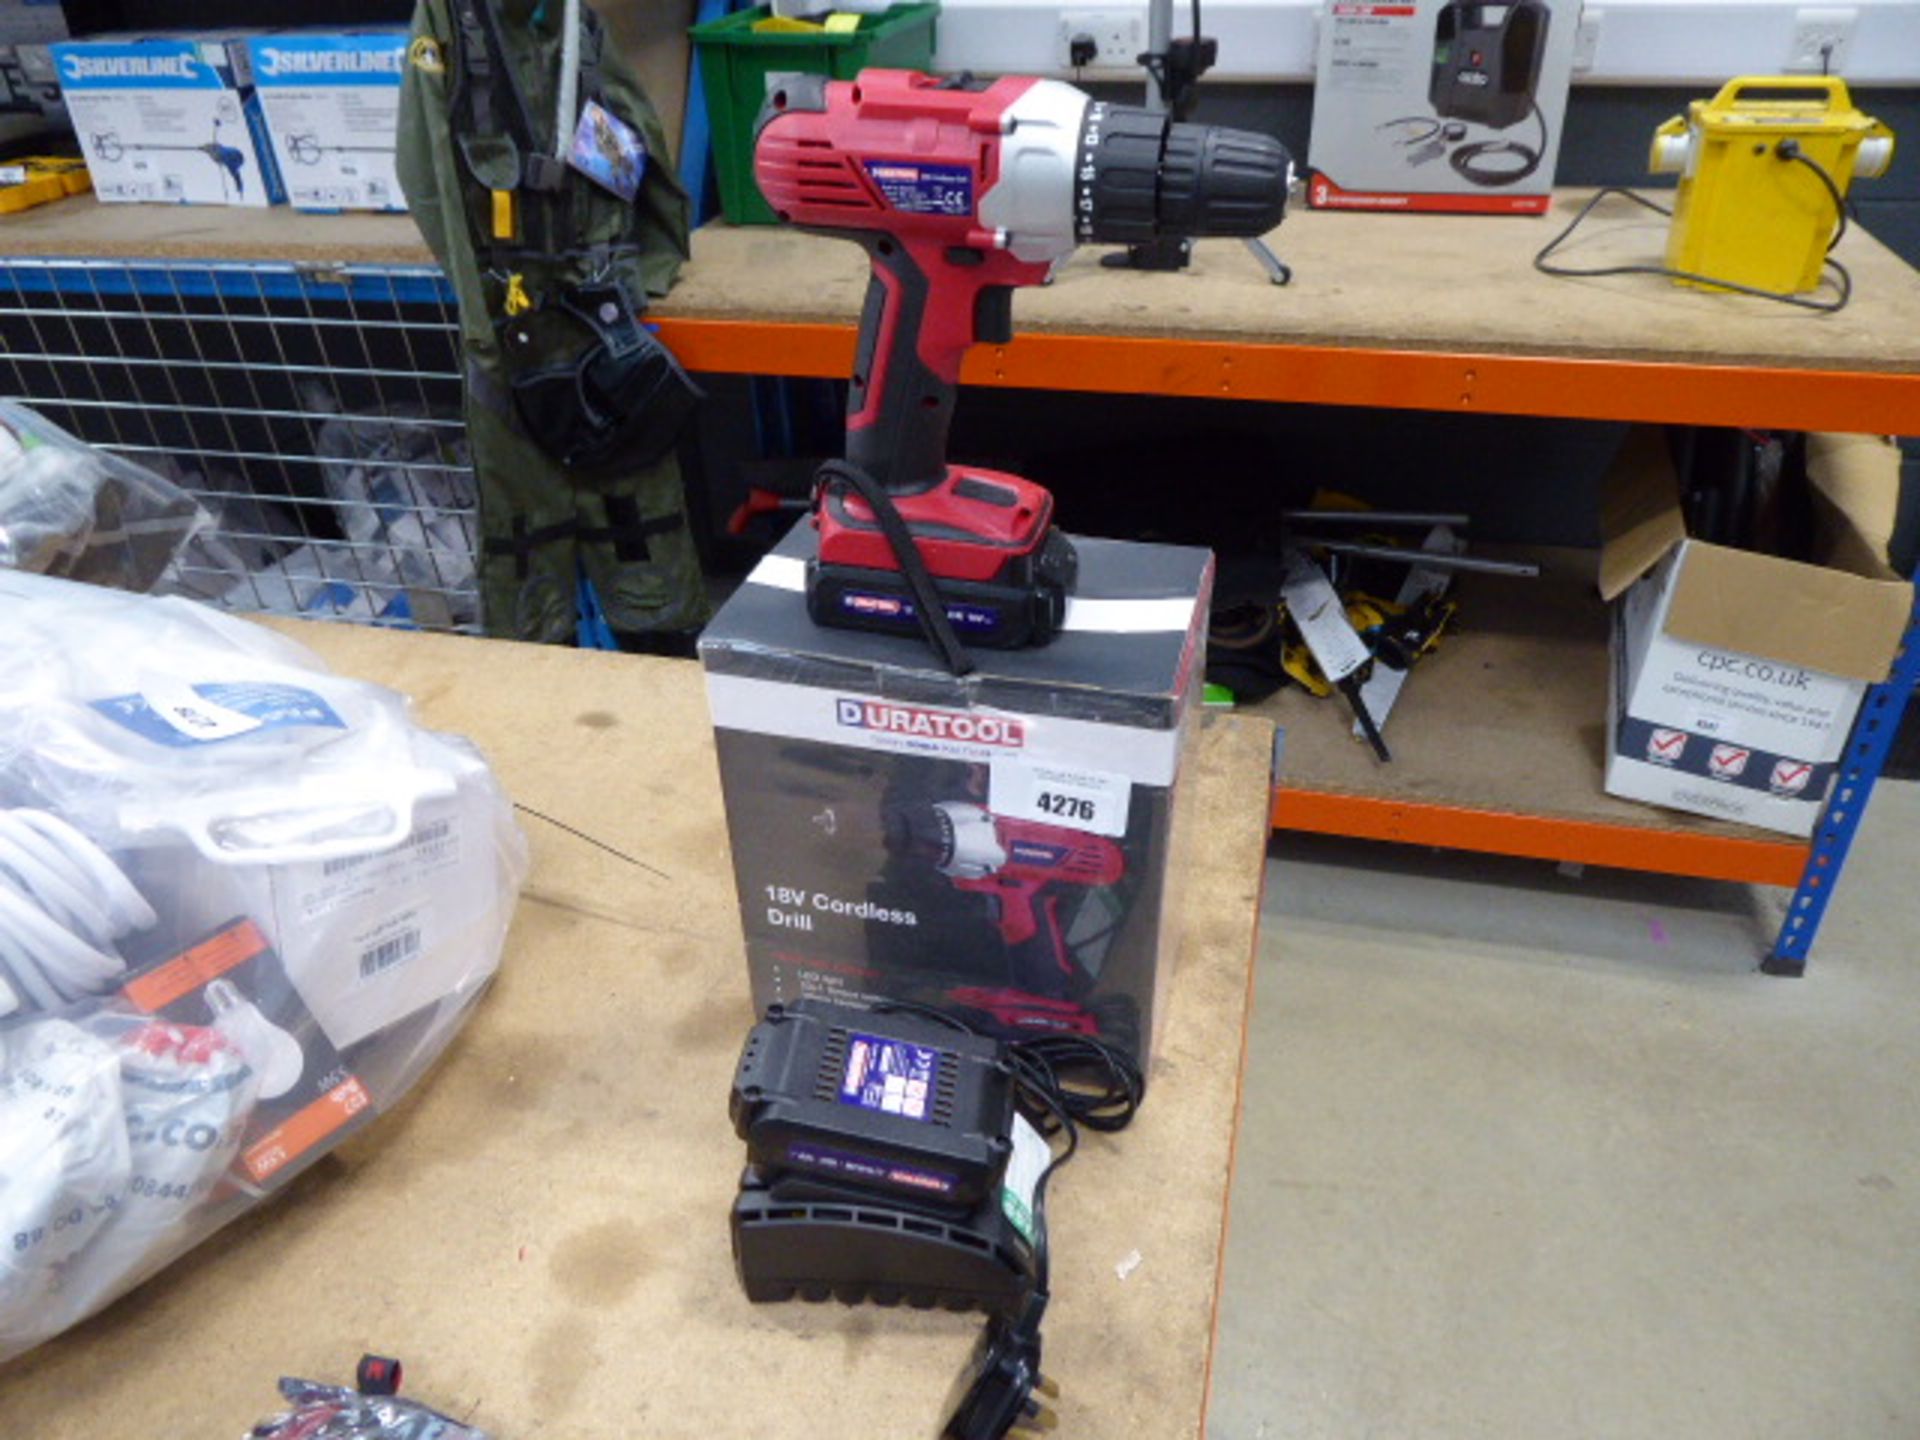 4288 Duratool 18v cordless boxed drill with 2 batteries and charger